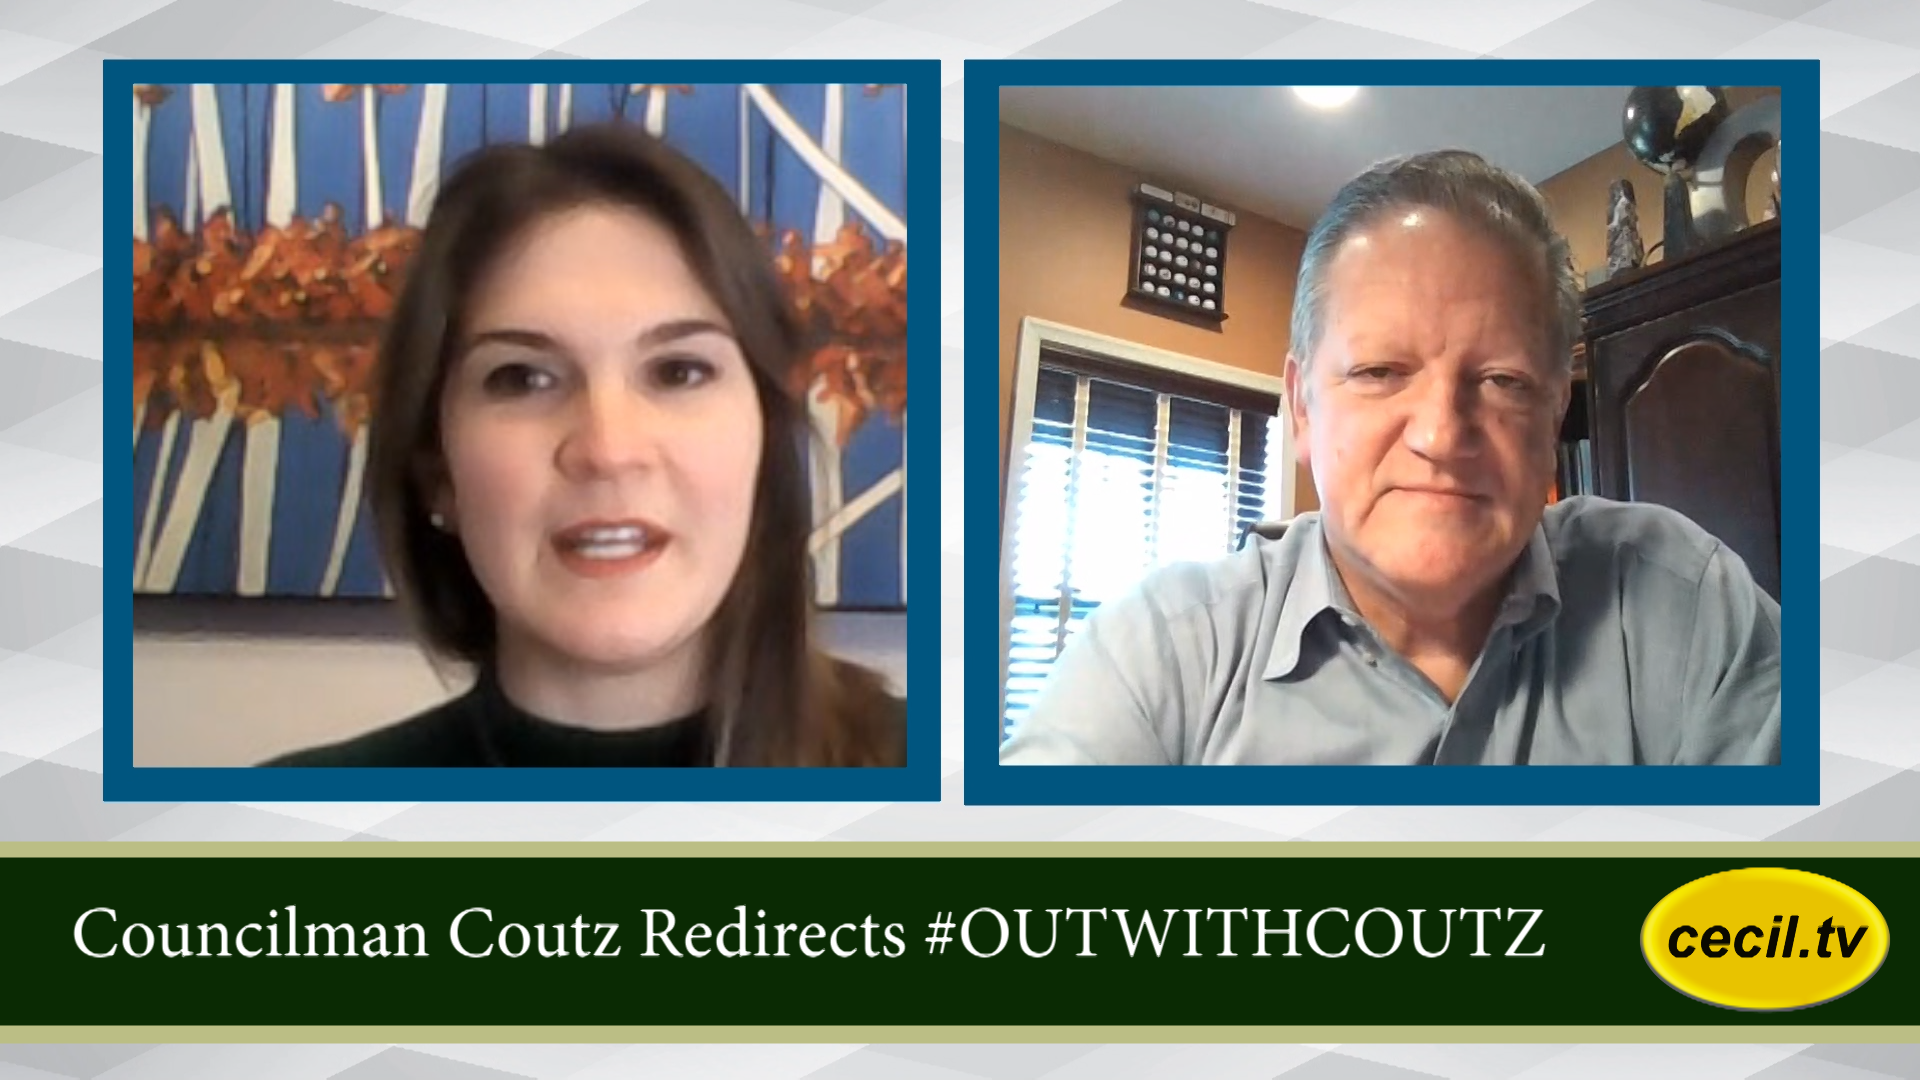 Councilman Coutz Redirects #OUTWITHCOUTZ